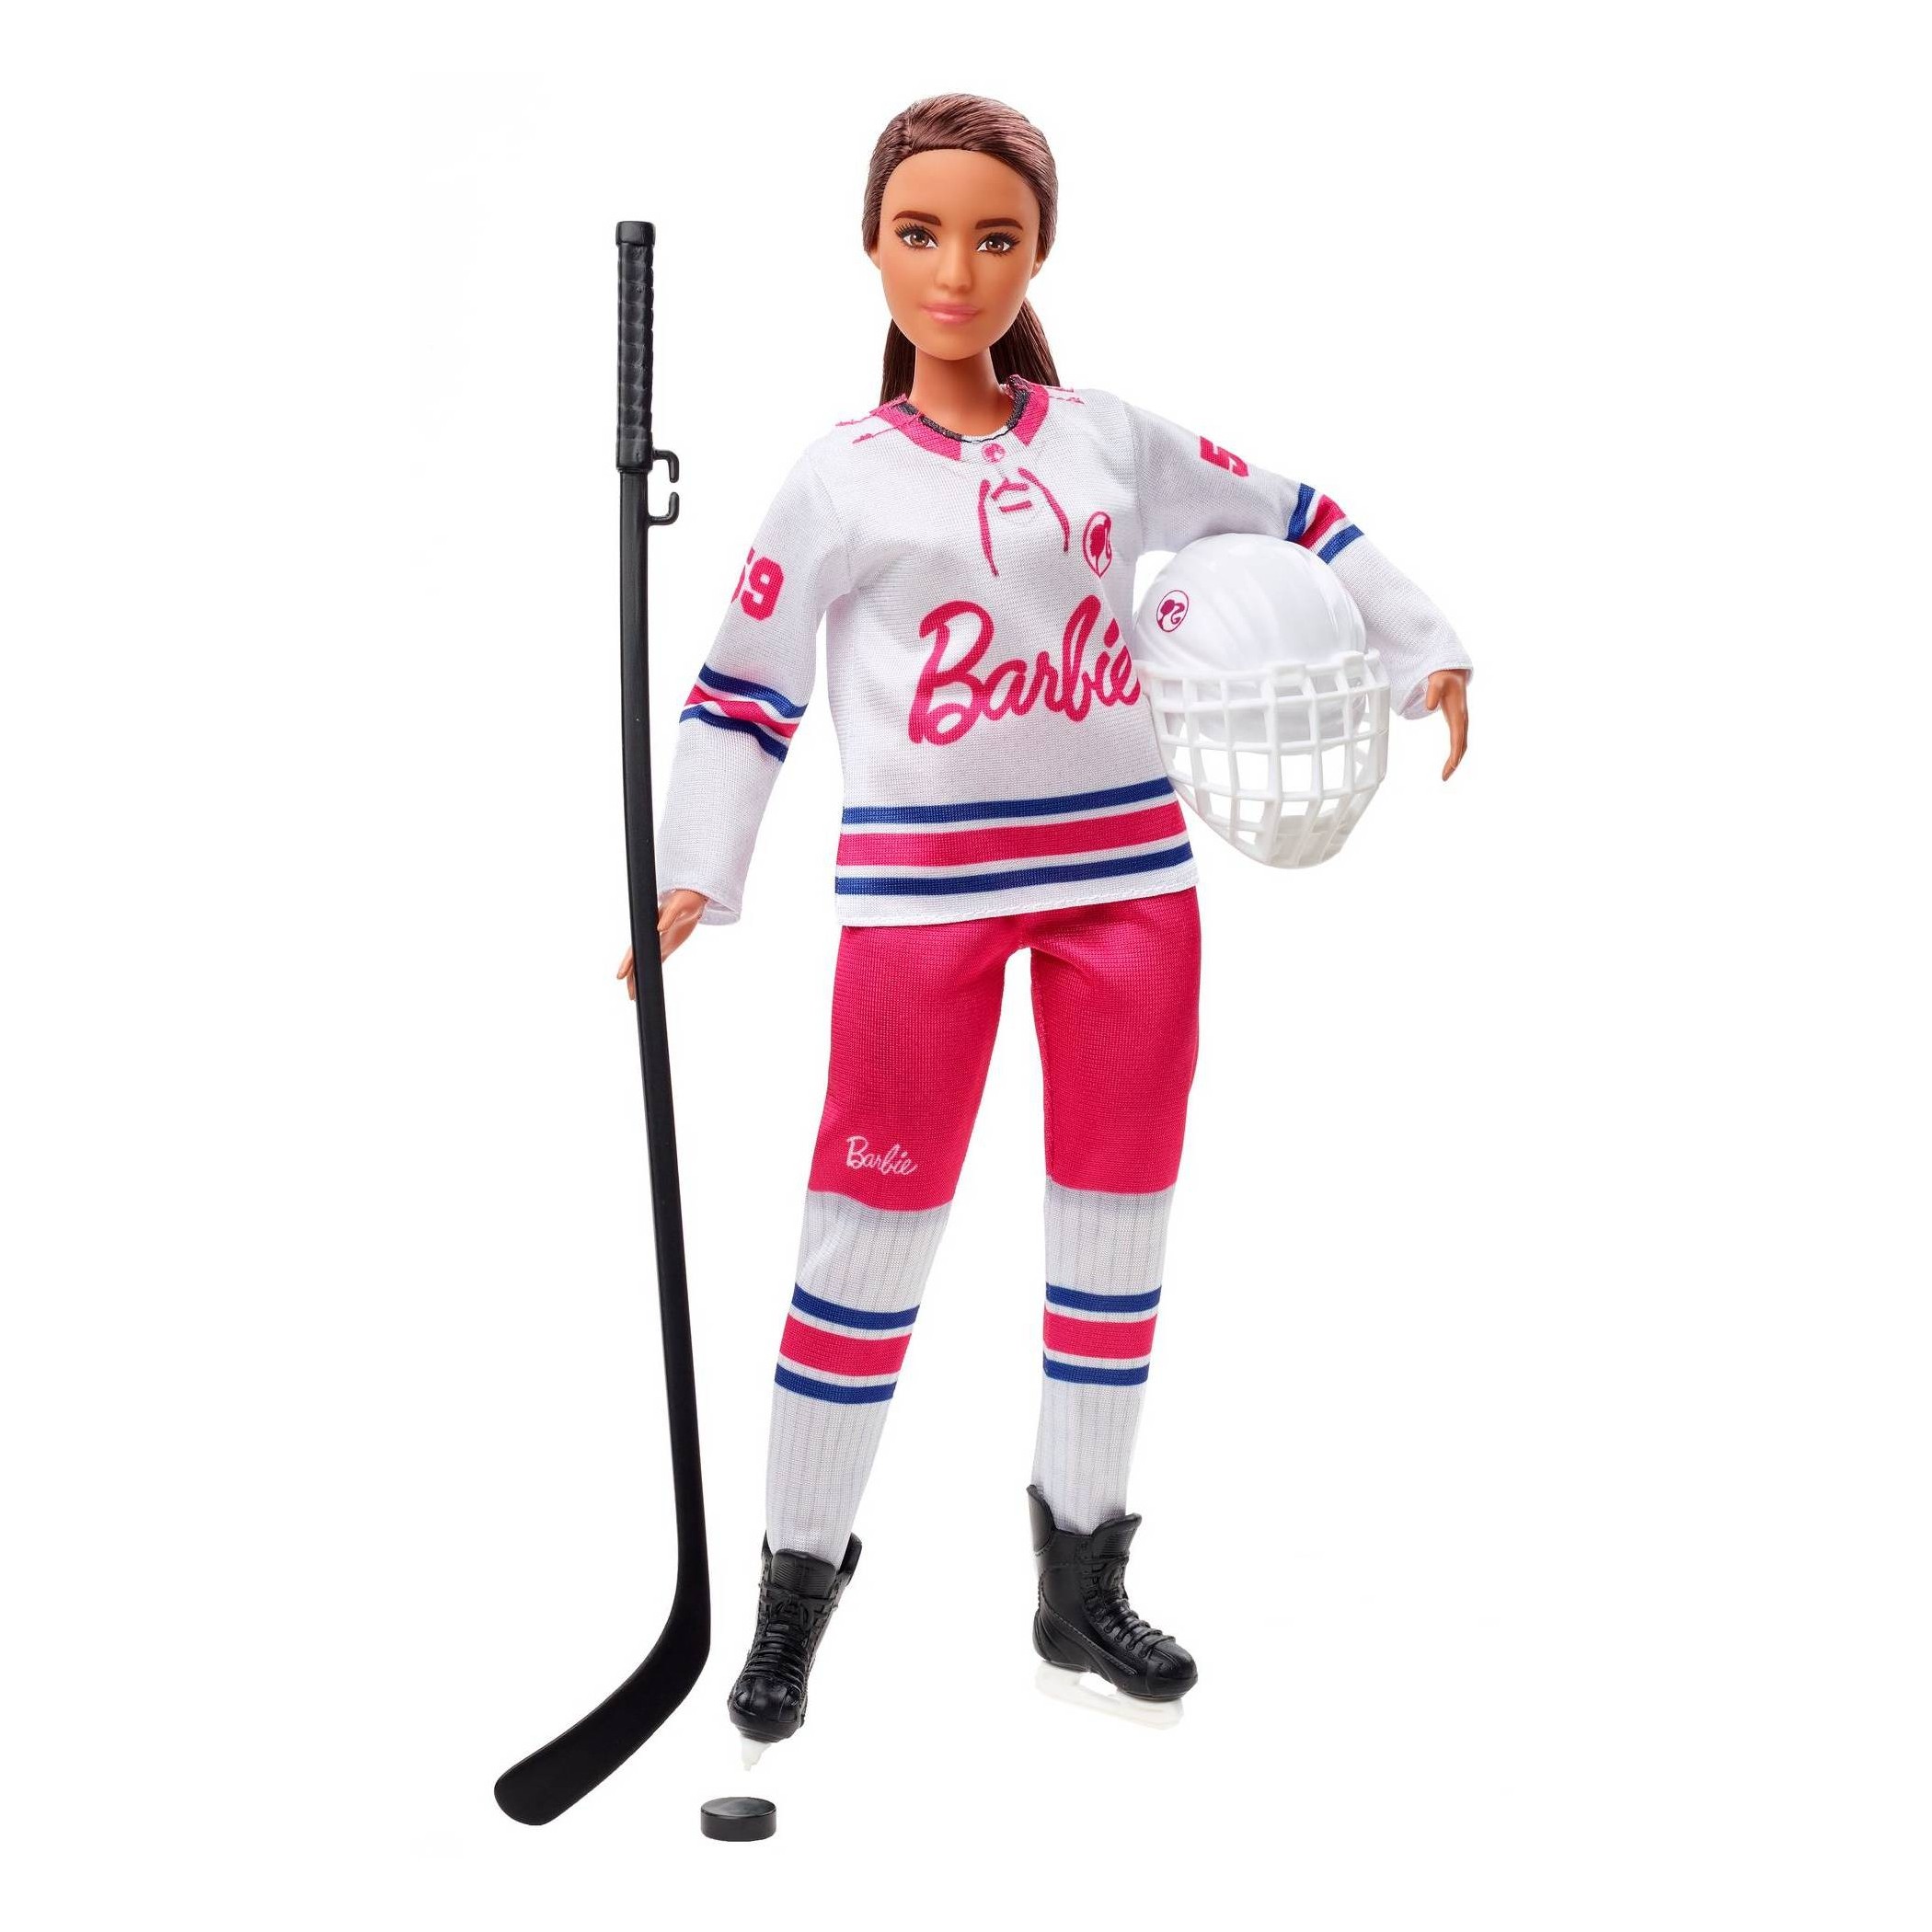 Helmet Barbie Winter Sports Snowboarder Blonde Doll Snowboard & Trophy with Jacket 12 inches Great Gift for Ages 3 and Up Scarf Pants 